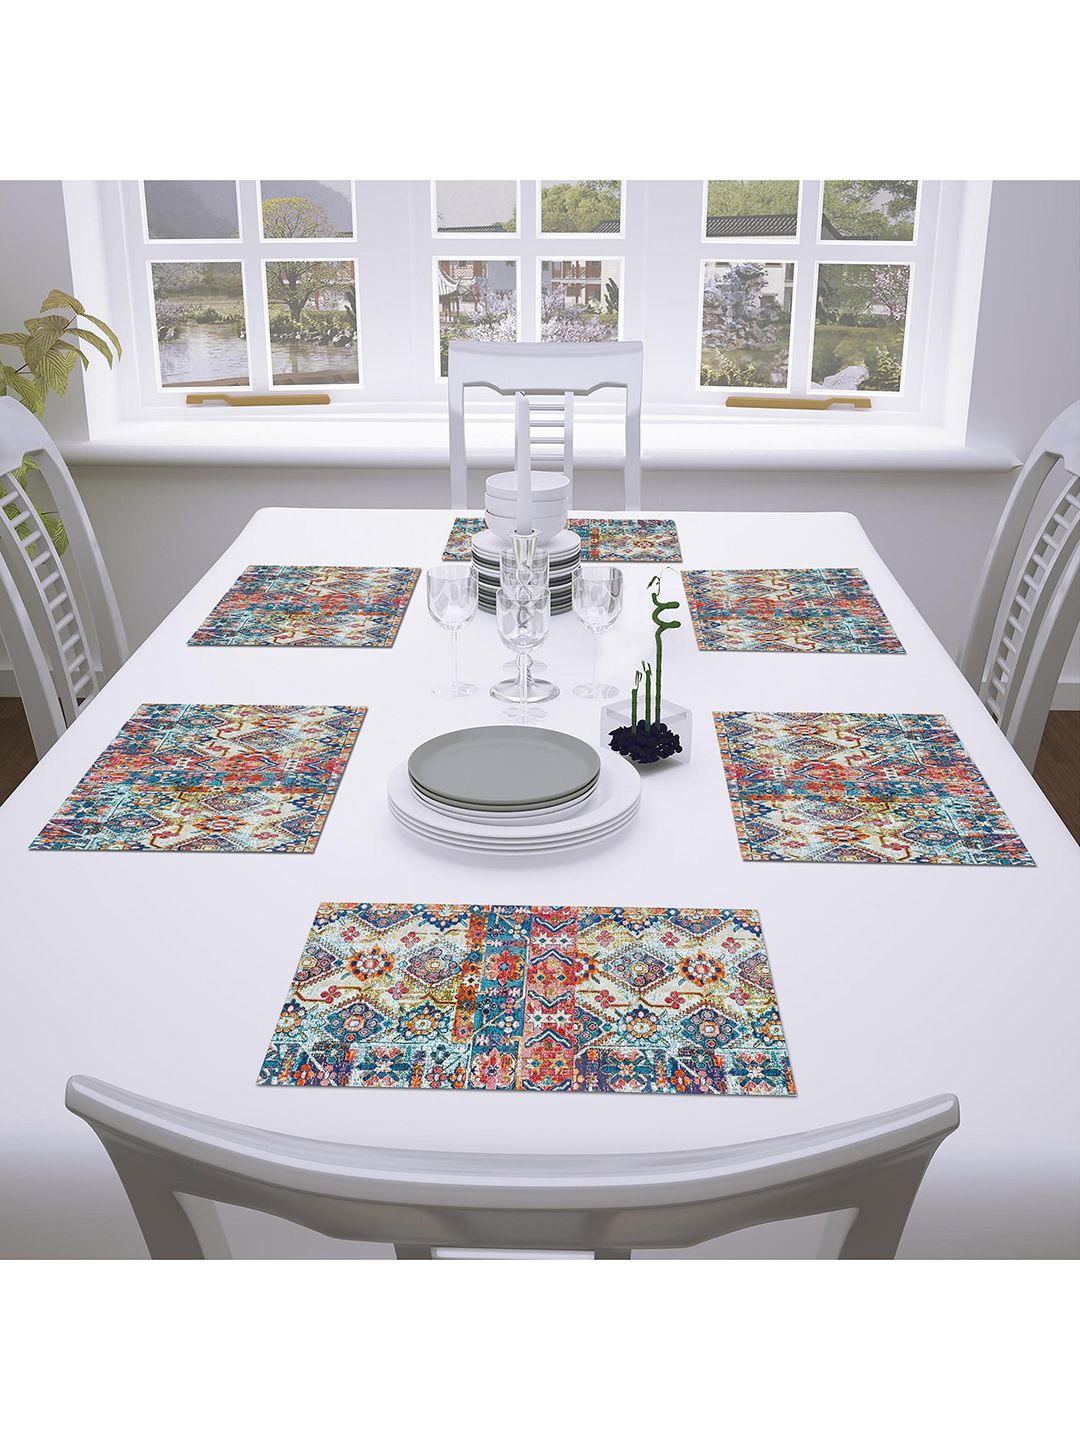 AEROHAVEN Set of 6 Multi-Colored Abstract Dining Table Placemats Price in India